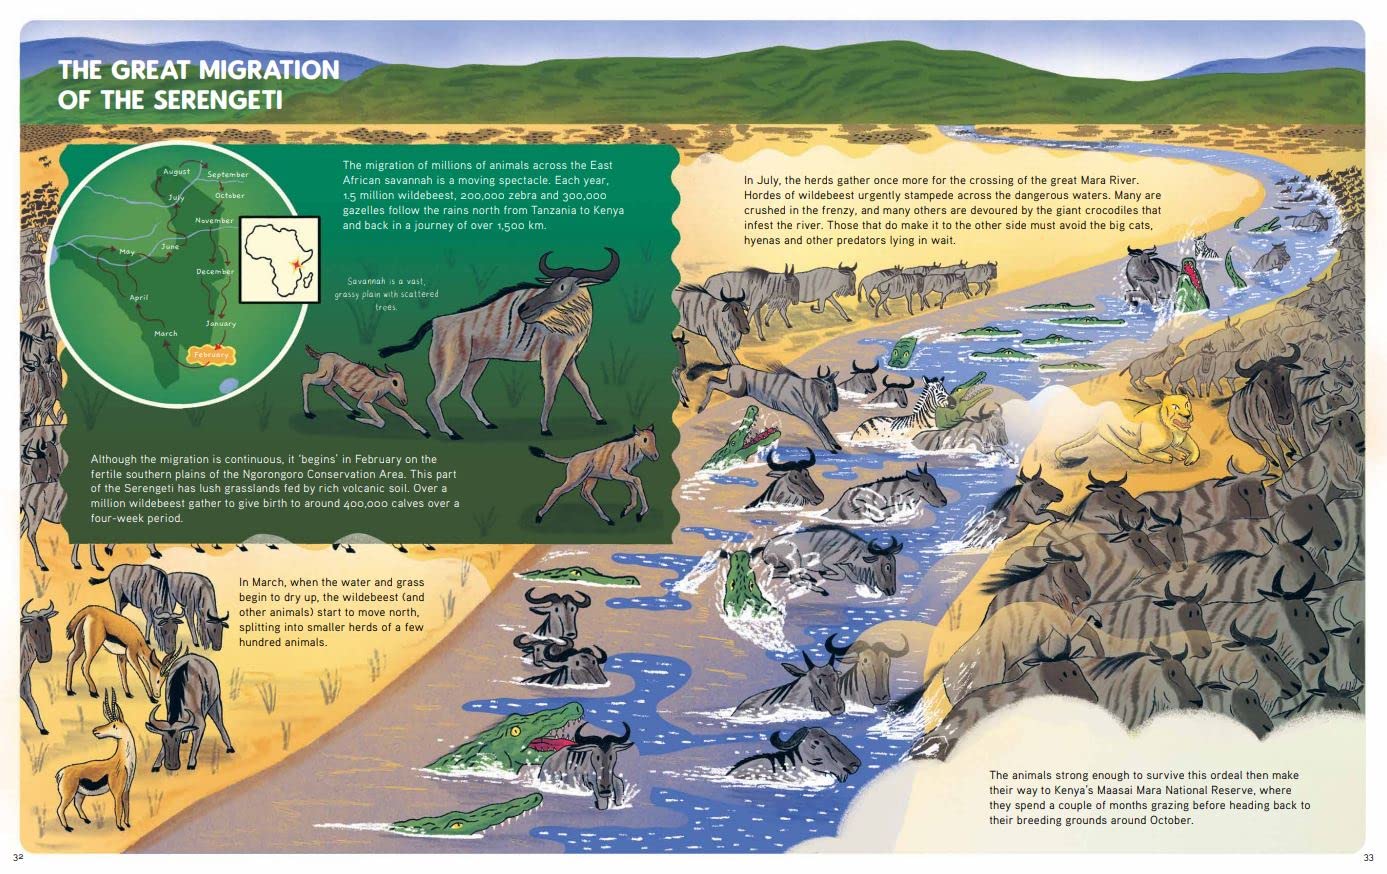 Epic Animal Journeys: Migration and Navigation by Air, Land and Sea